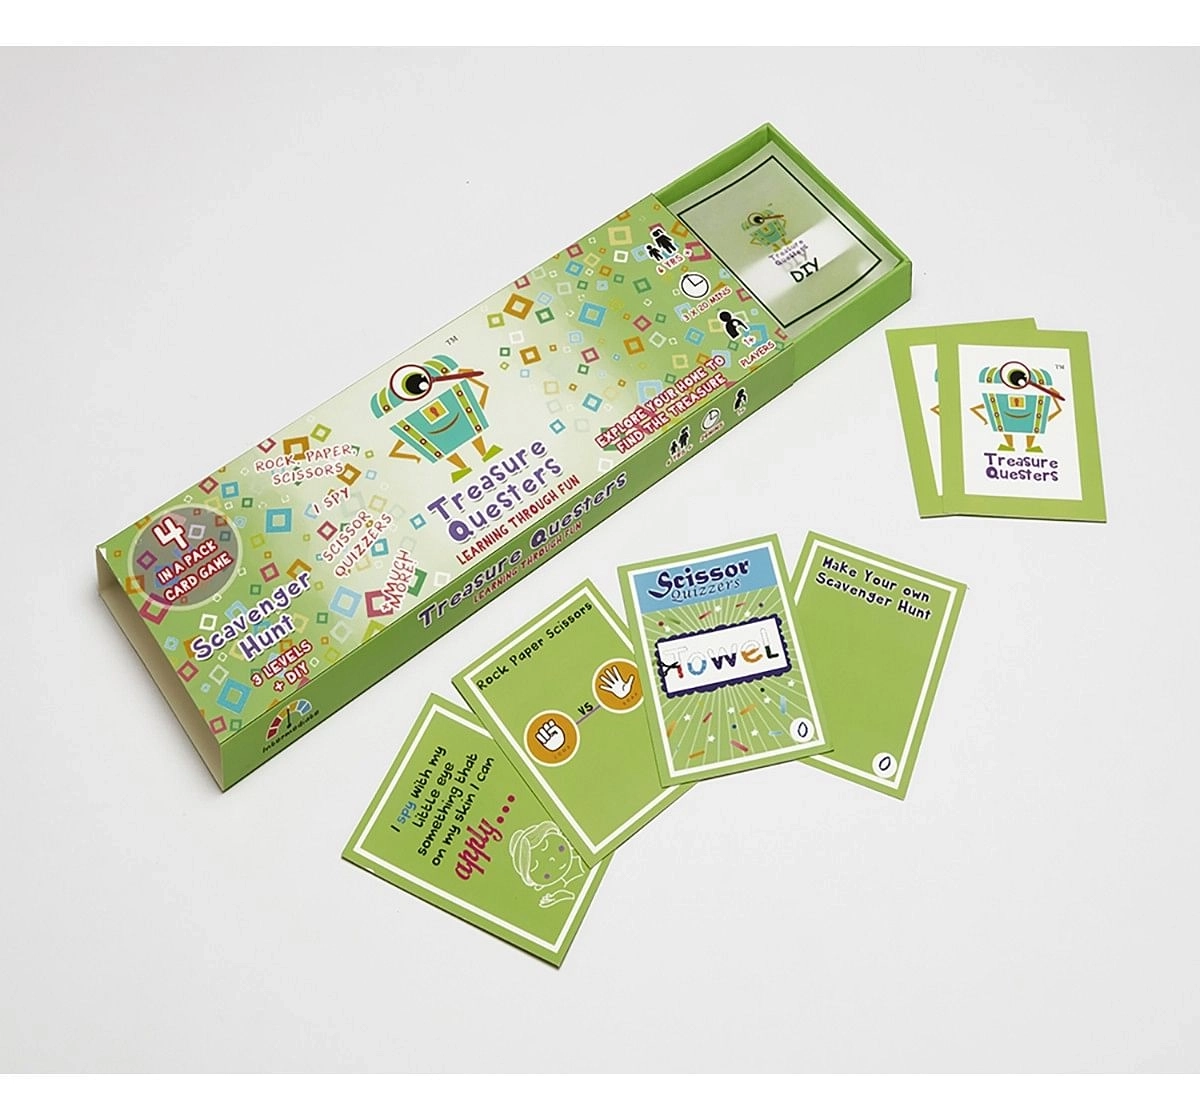 Treasure Questers Scavenger Hunt - Green (Intermidiate) 6-10 years Games for Kids age 6Y+ (Green)